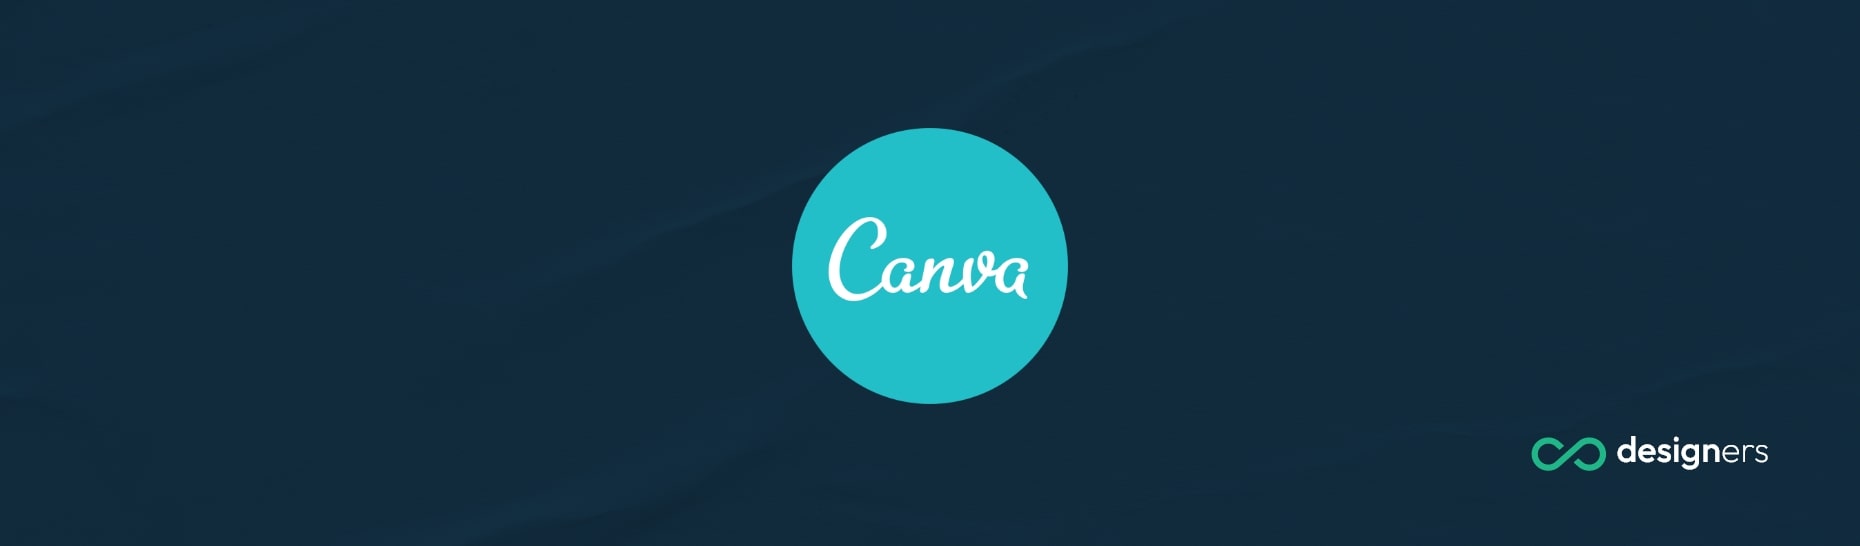 Does Canva Deliver to UK?